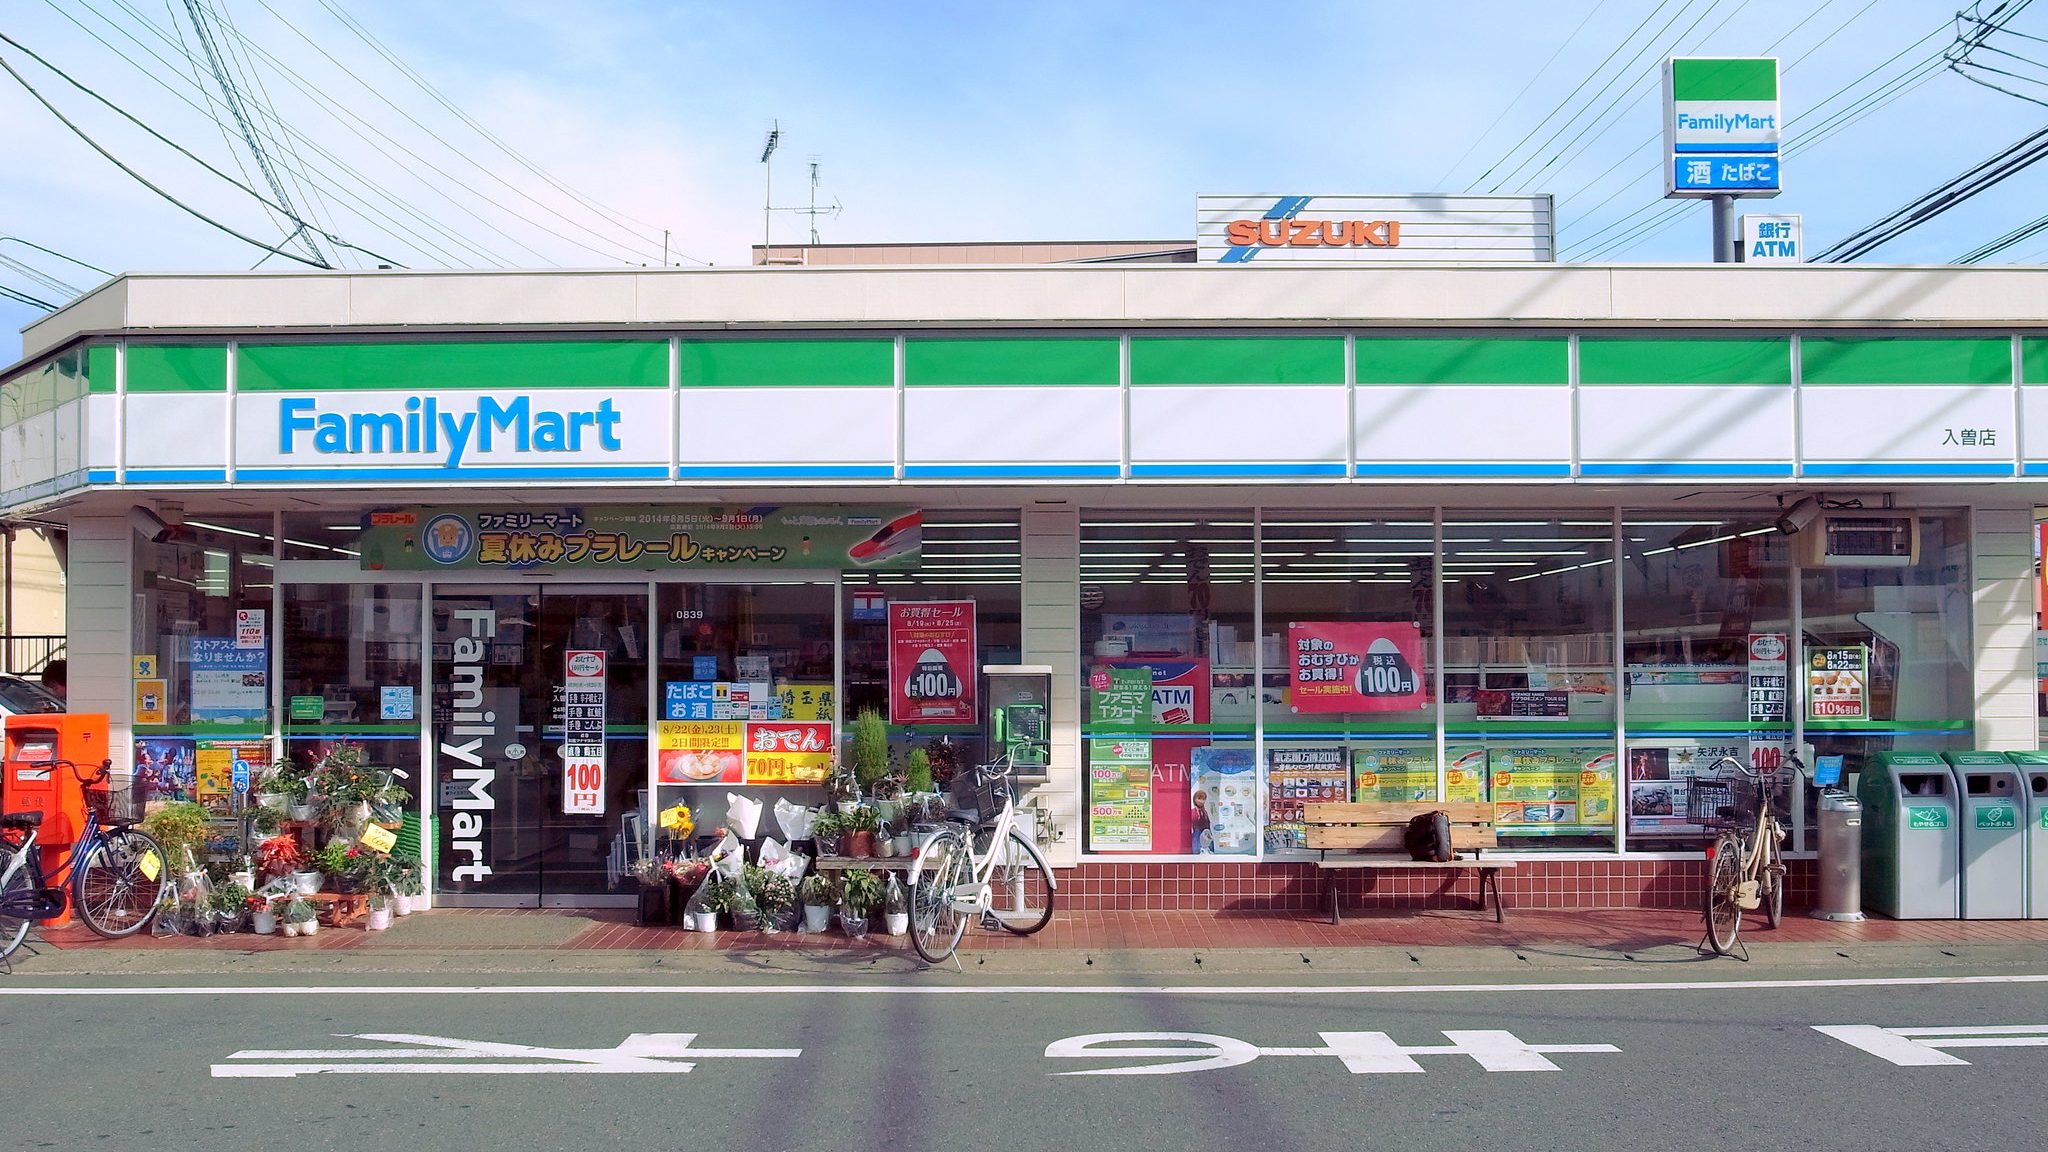 FamilyMart in Japan using cleaning robots